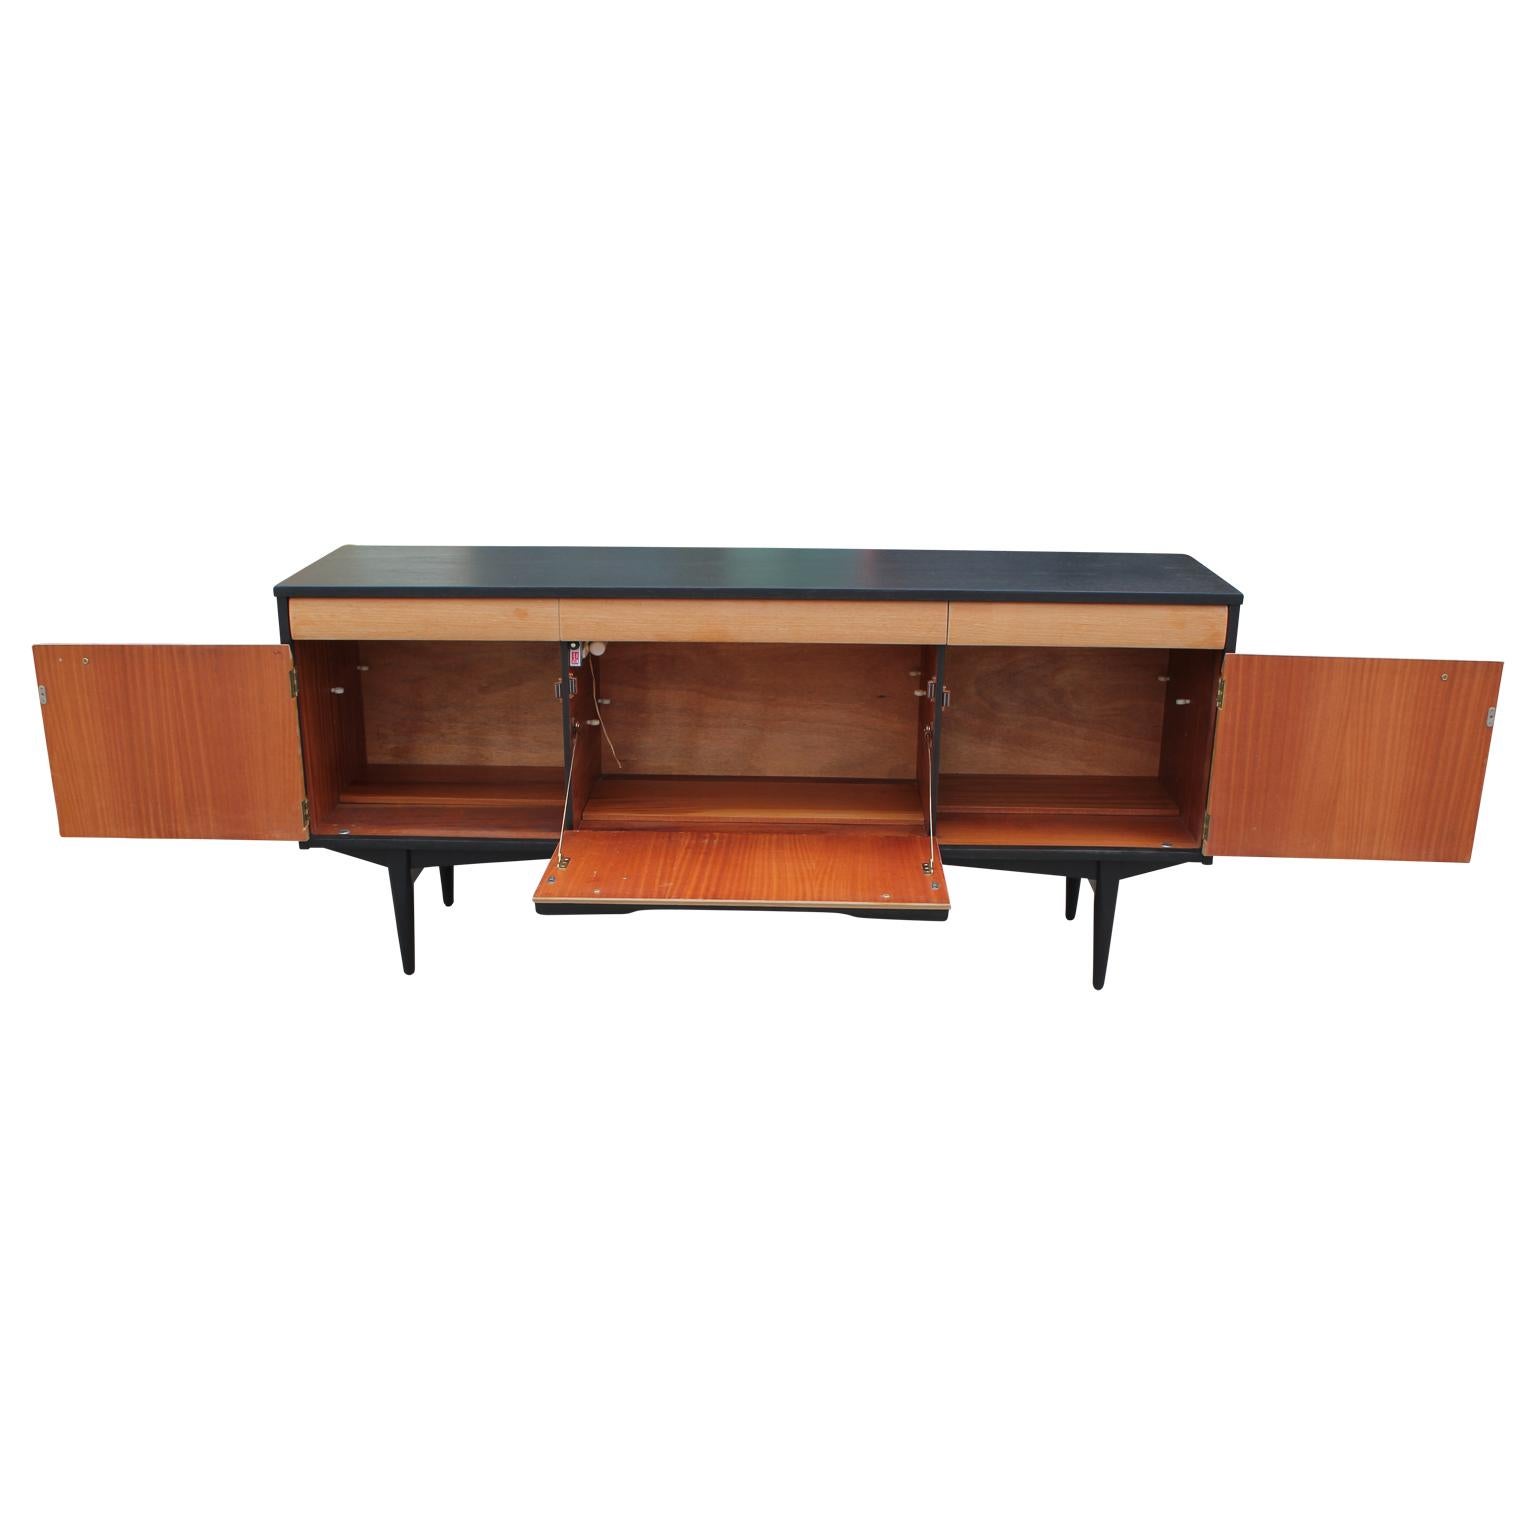 Mid-Century Modern Two-Tone Clean Lined Credenza or Sideboard with Three Drawers (Mitte des 20. Jahrhunderts)